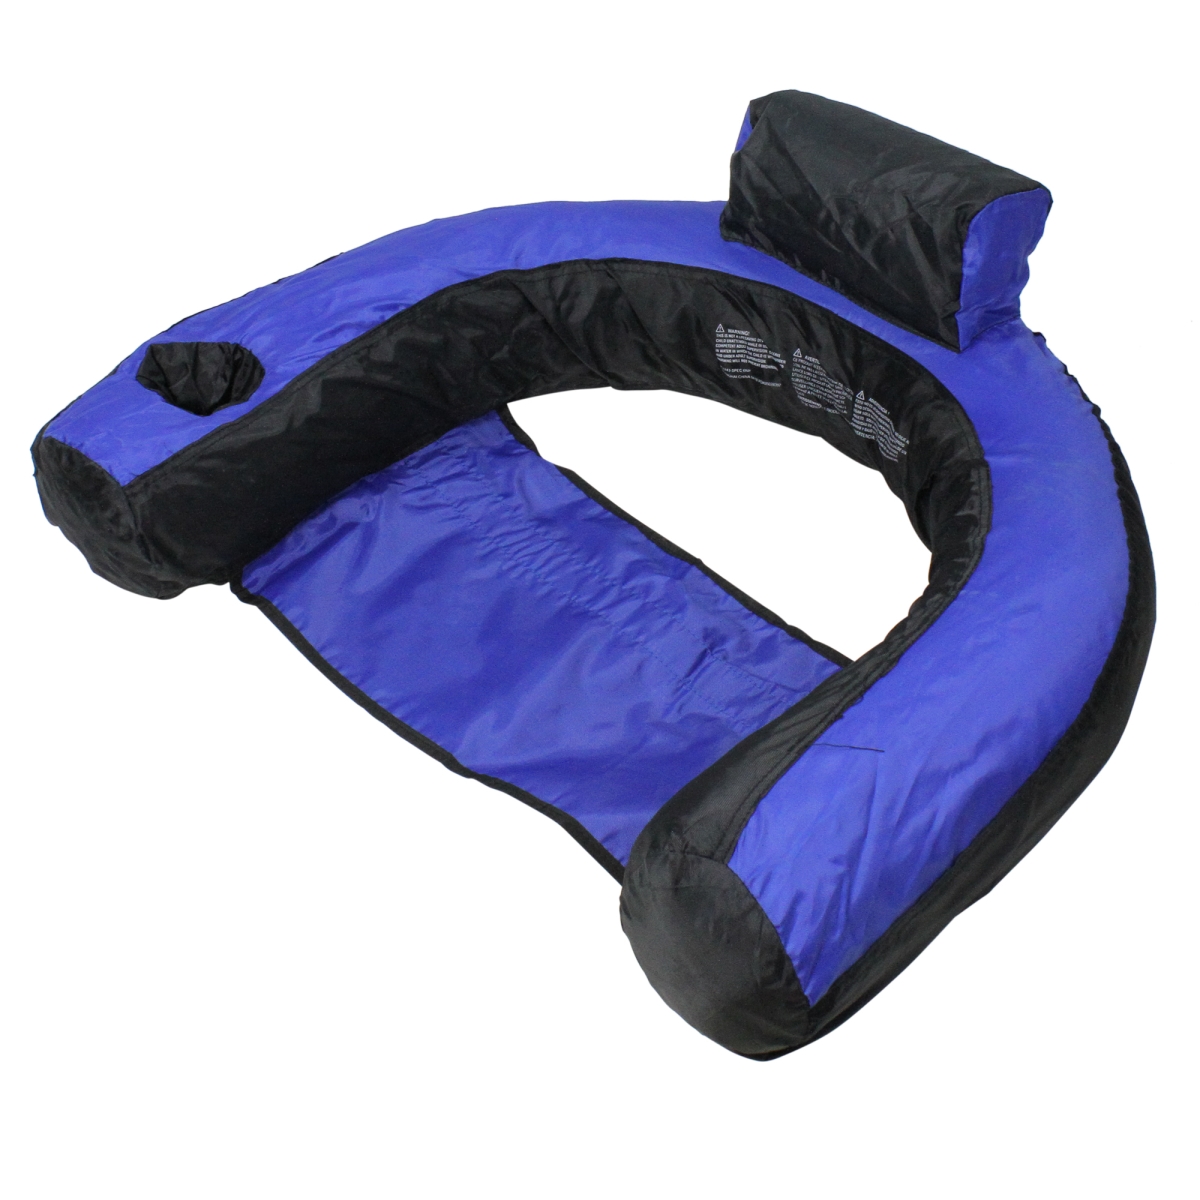 32233524 28 in. Inflatable Floating U-Seat Swimming Pool Lounger, Blue & Black -  Swim Central